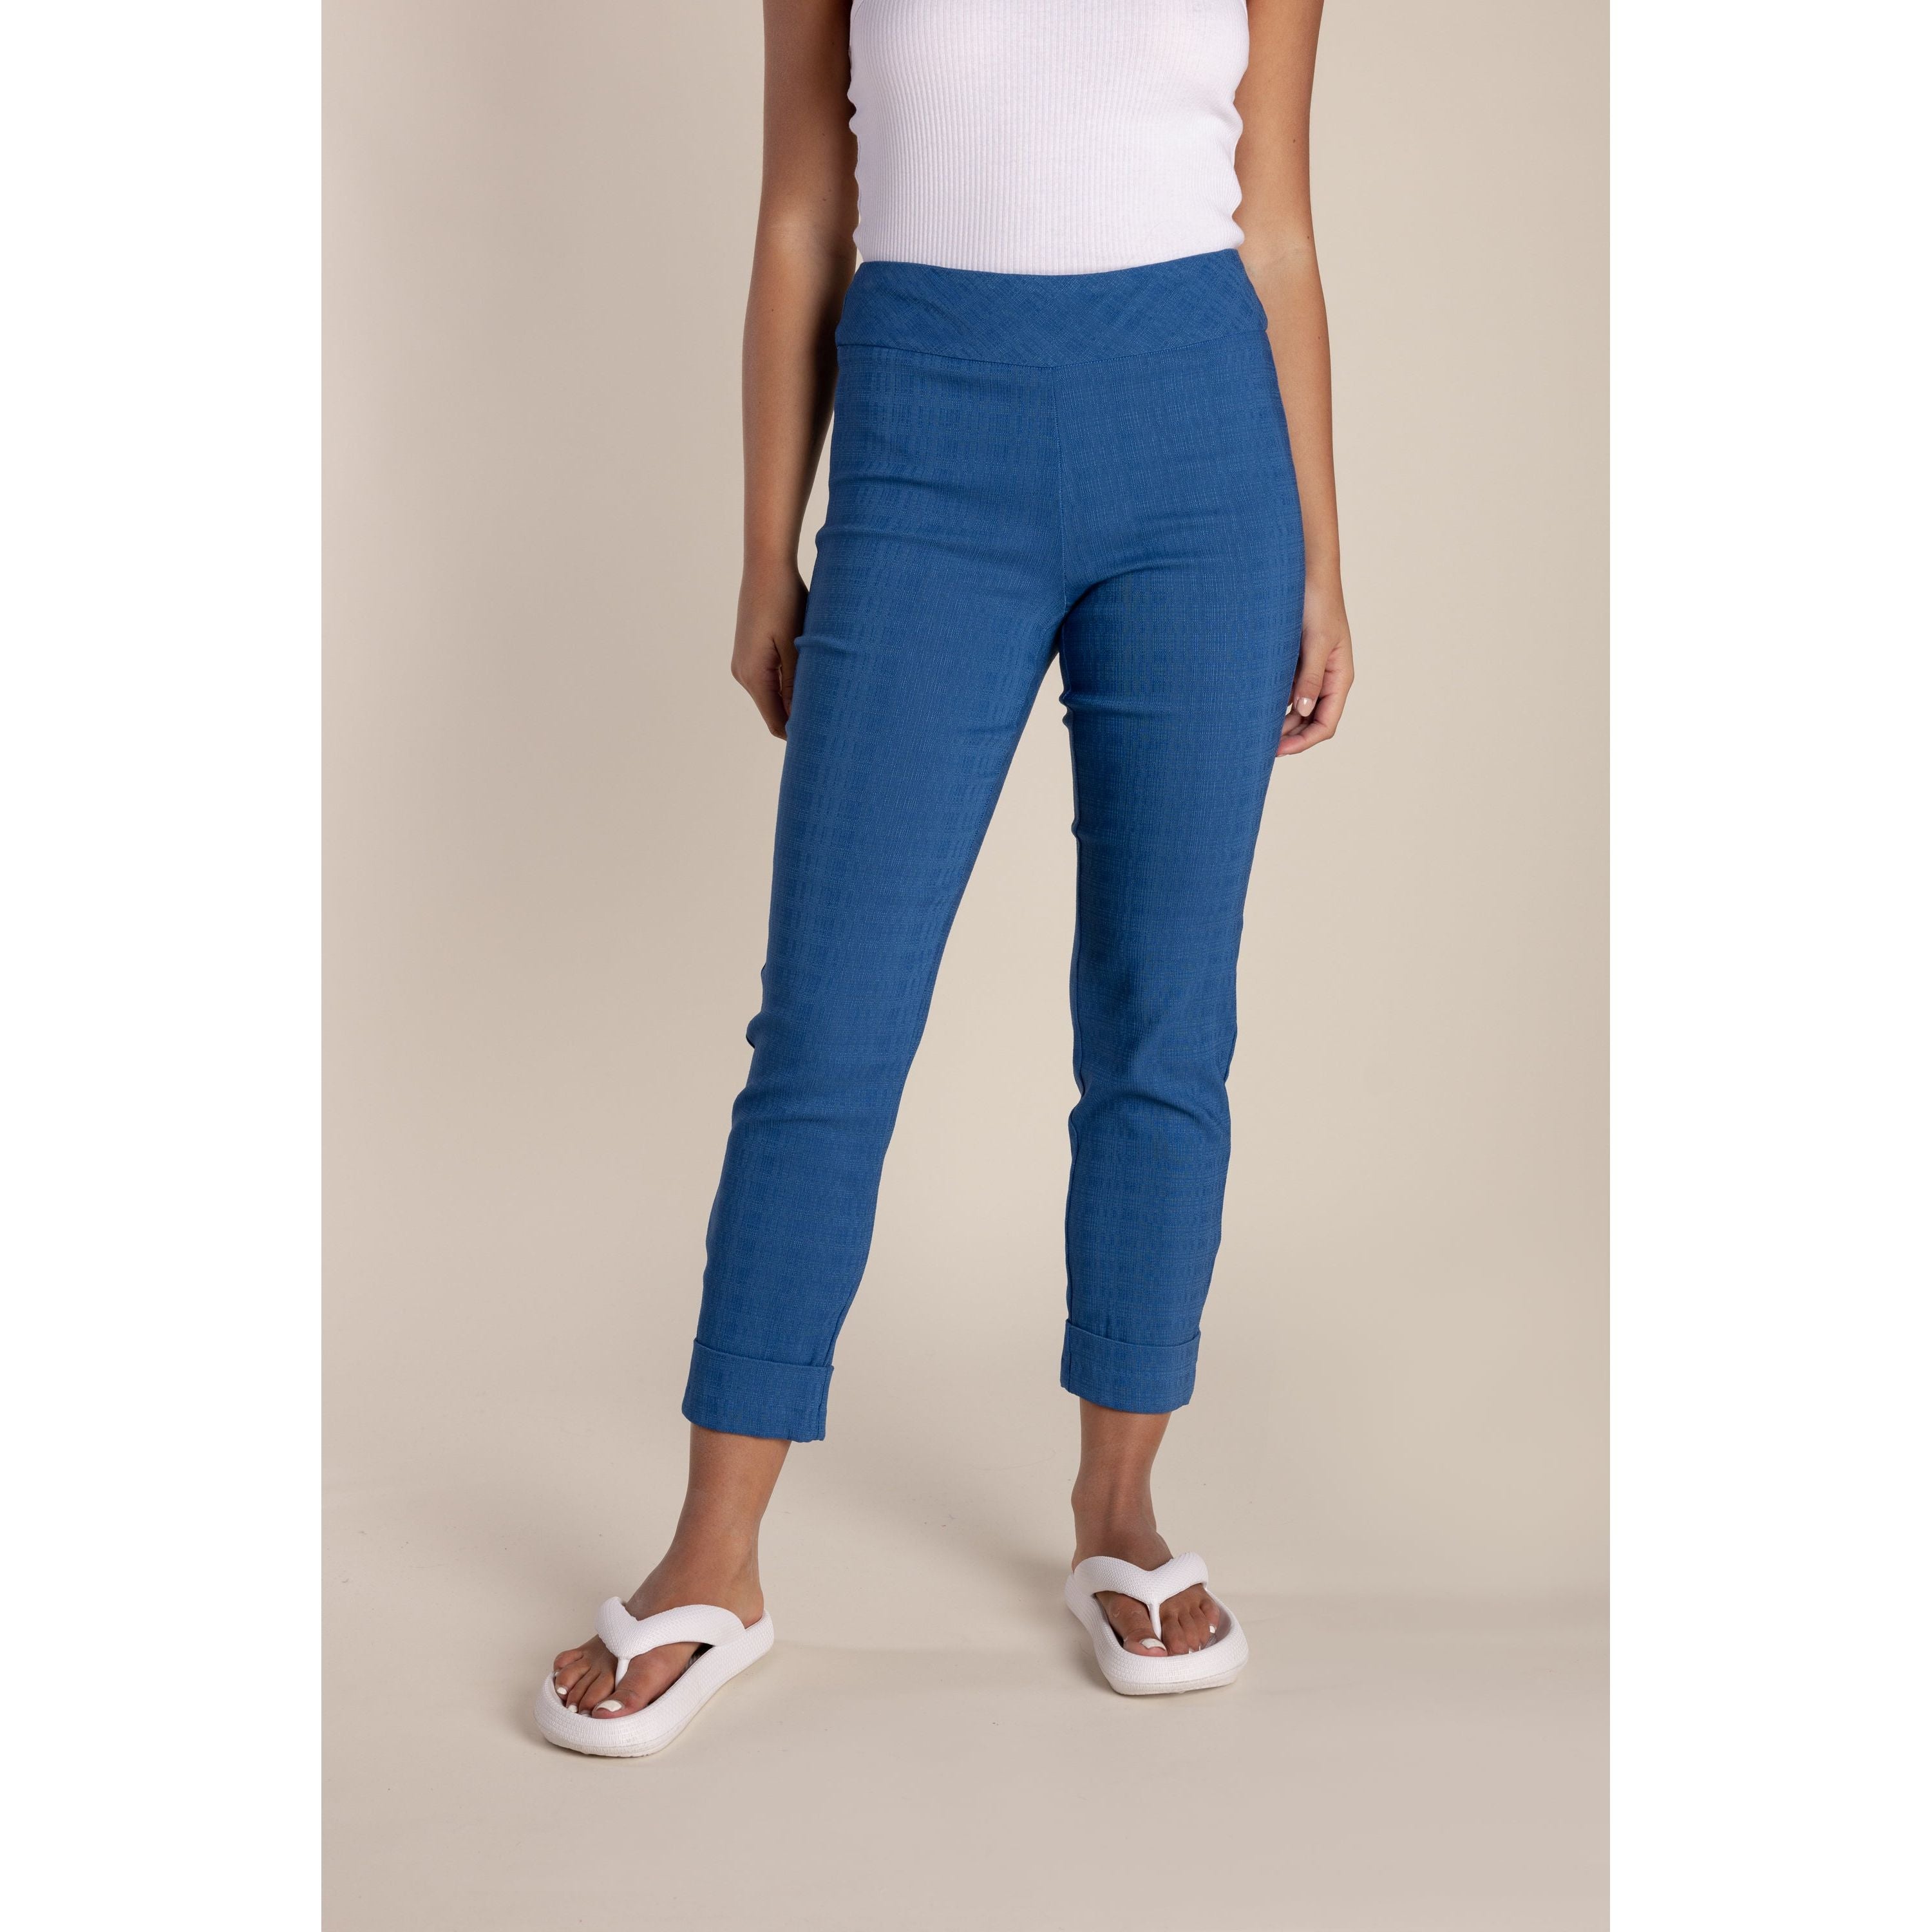 Two T's - Pull On Cuffed Pant Bright Denim